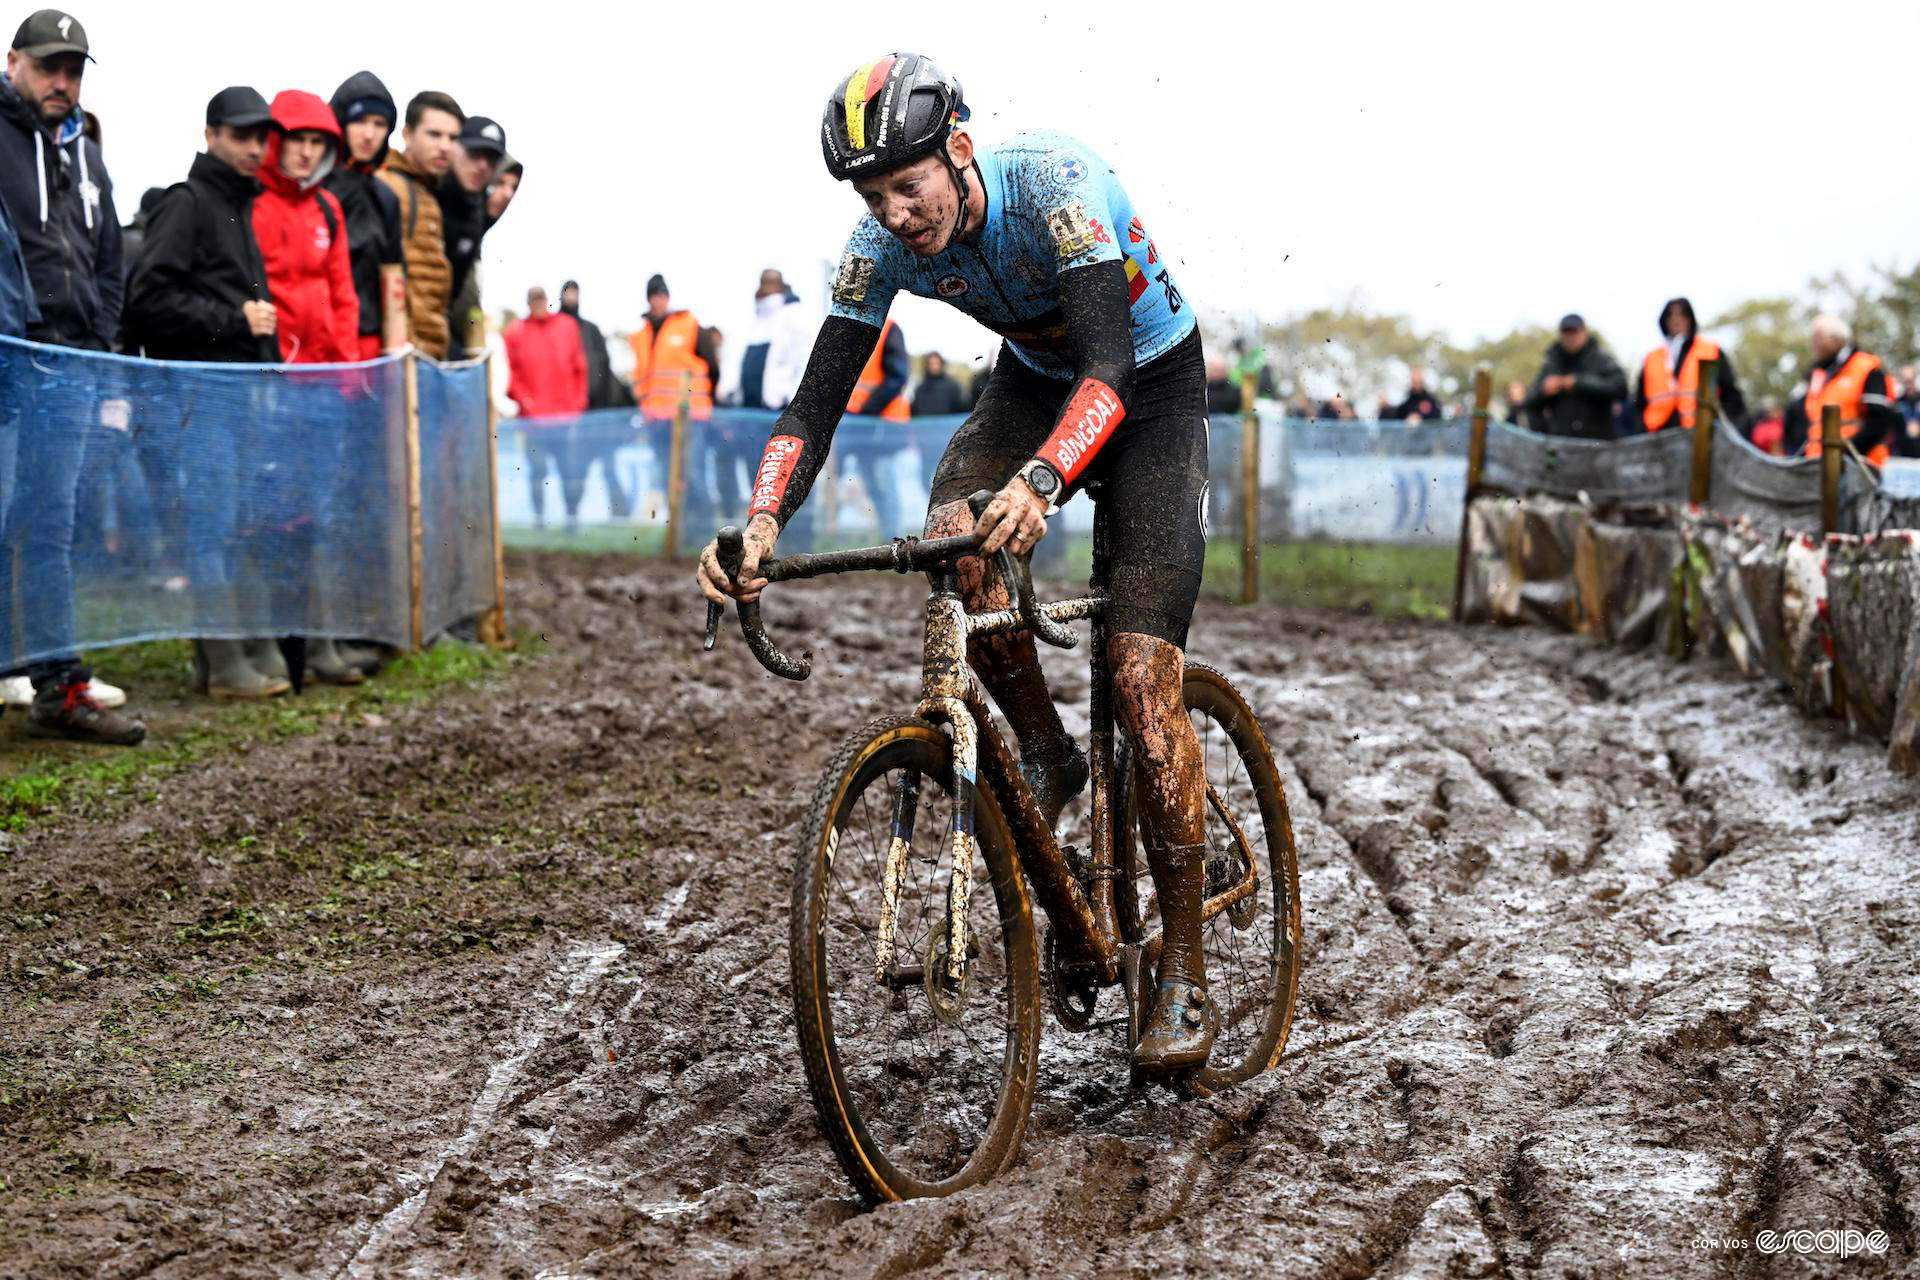 Michael Vanthourenhout of Belgium rides through thick mud during the european cyclocross champs.